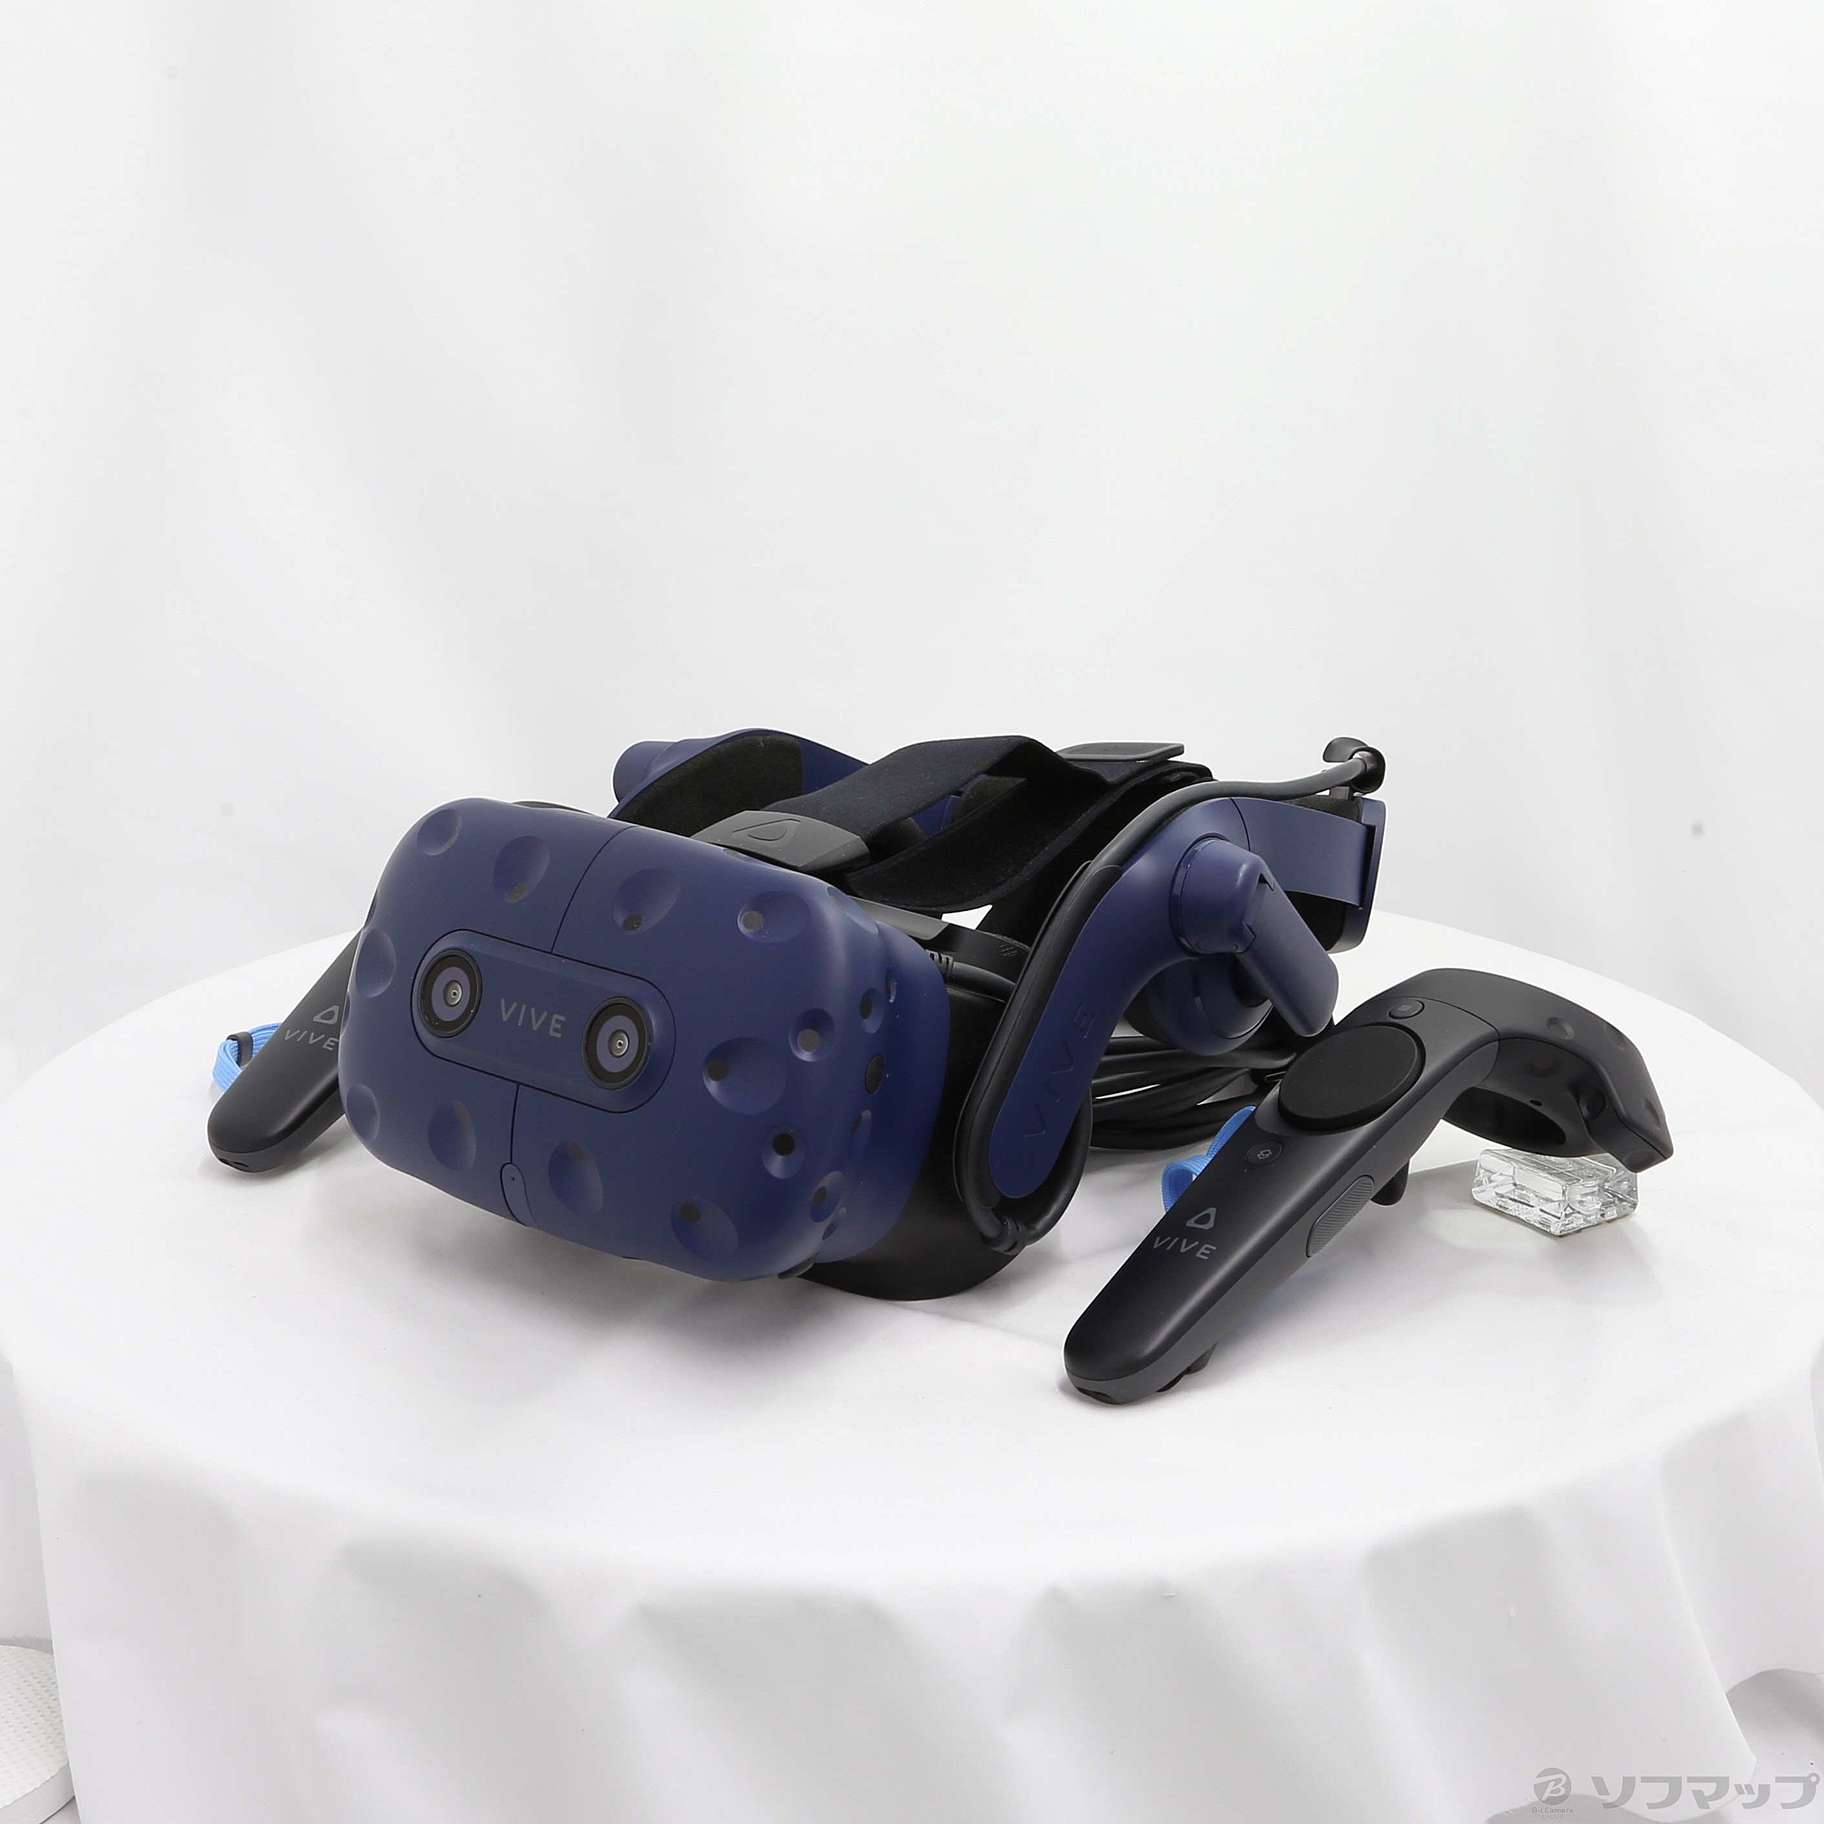 VIVE Pro スターターキット 99HAPY005-00